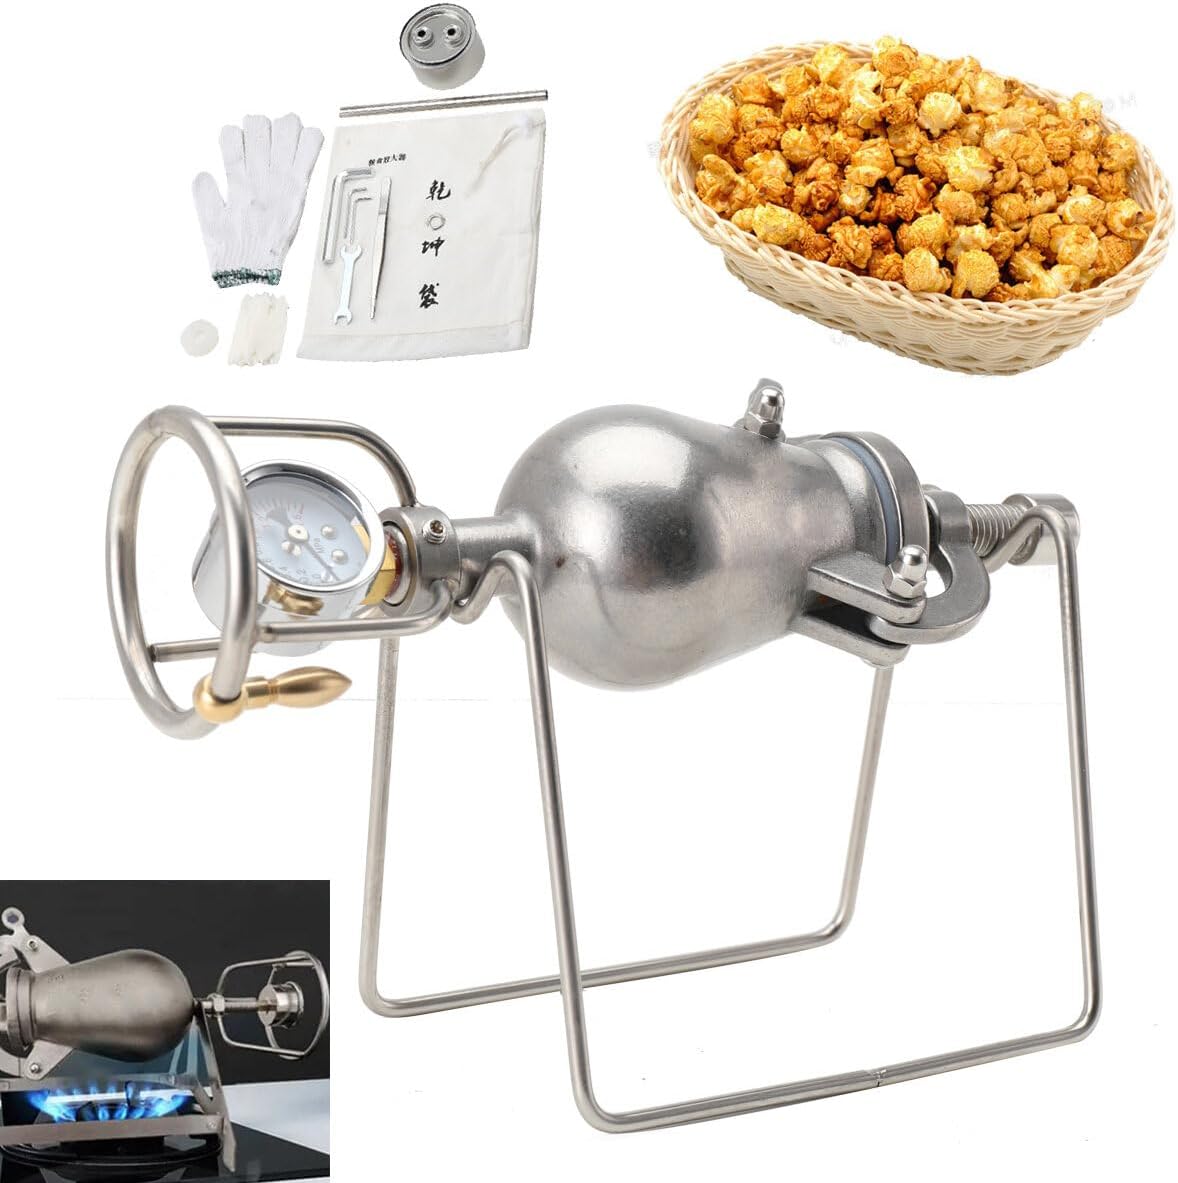 QAVODB 100 ml High Pressure Popcorn Machine, Mini Stainless Steel, Professional Popcorn Roaster, Hand Crank, Gas Heating, Slow Thrust with Pressure Gauge for Family Celebrations, Study Party Fun